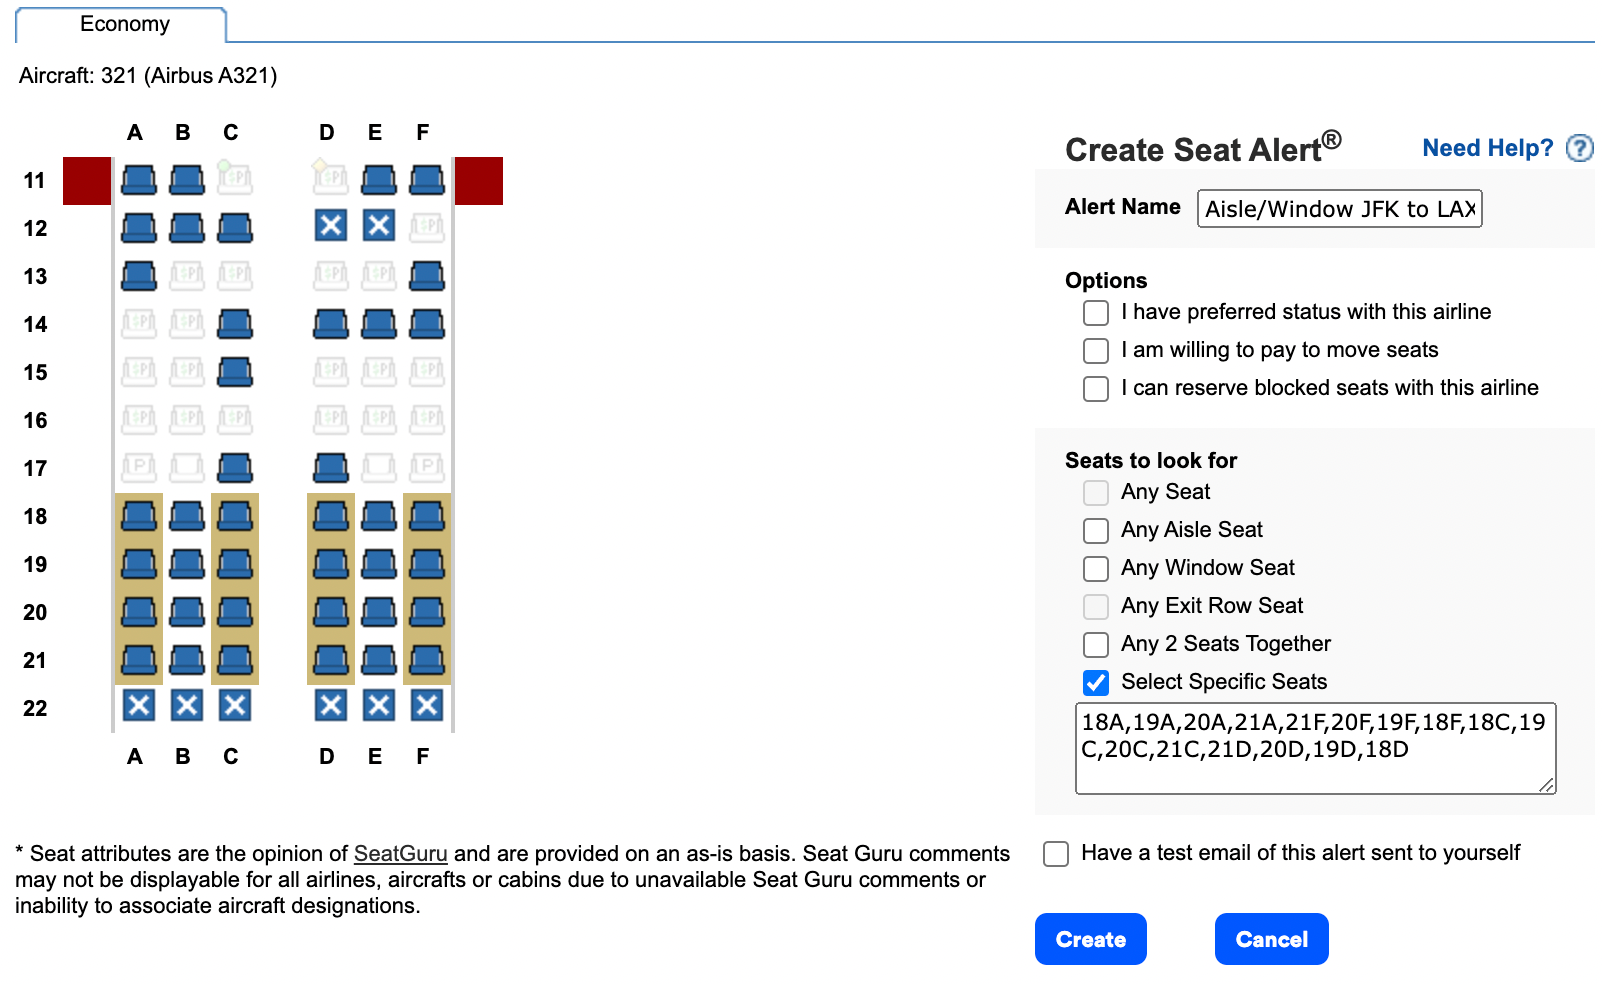 Select all complimentary aisle and window seats